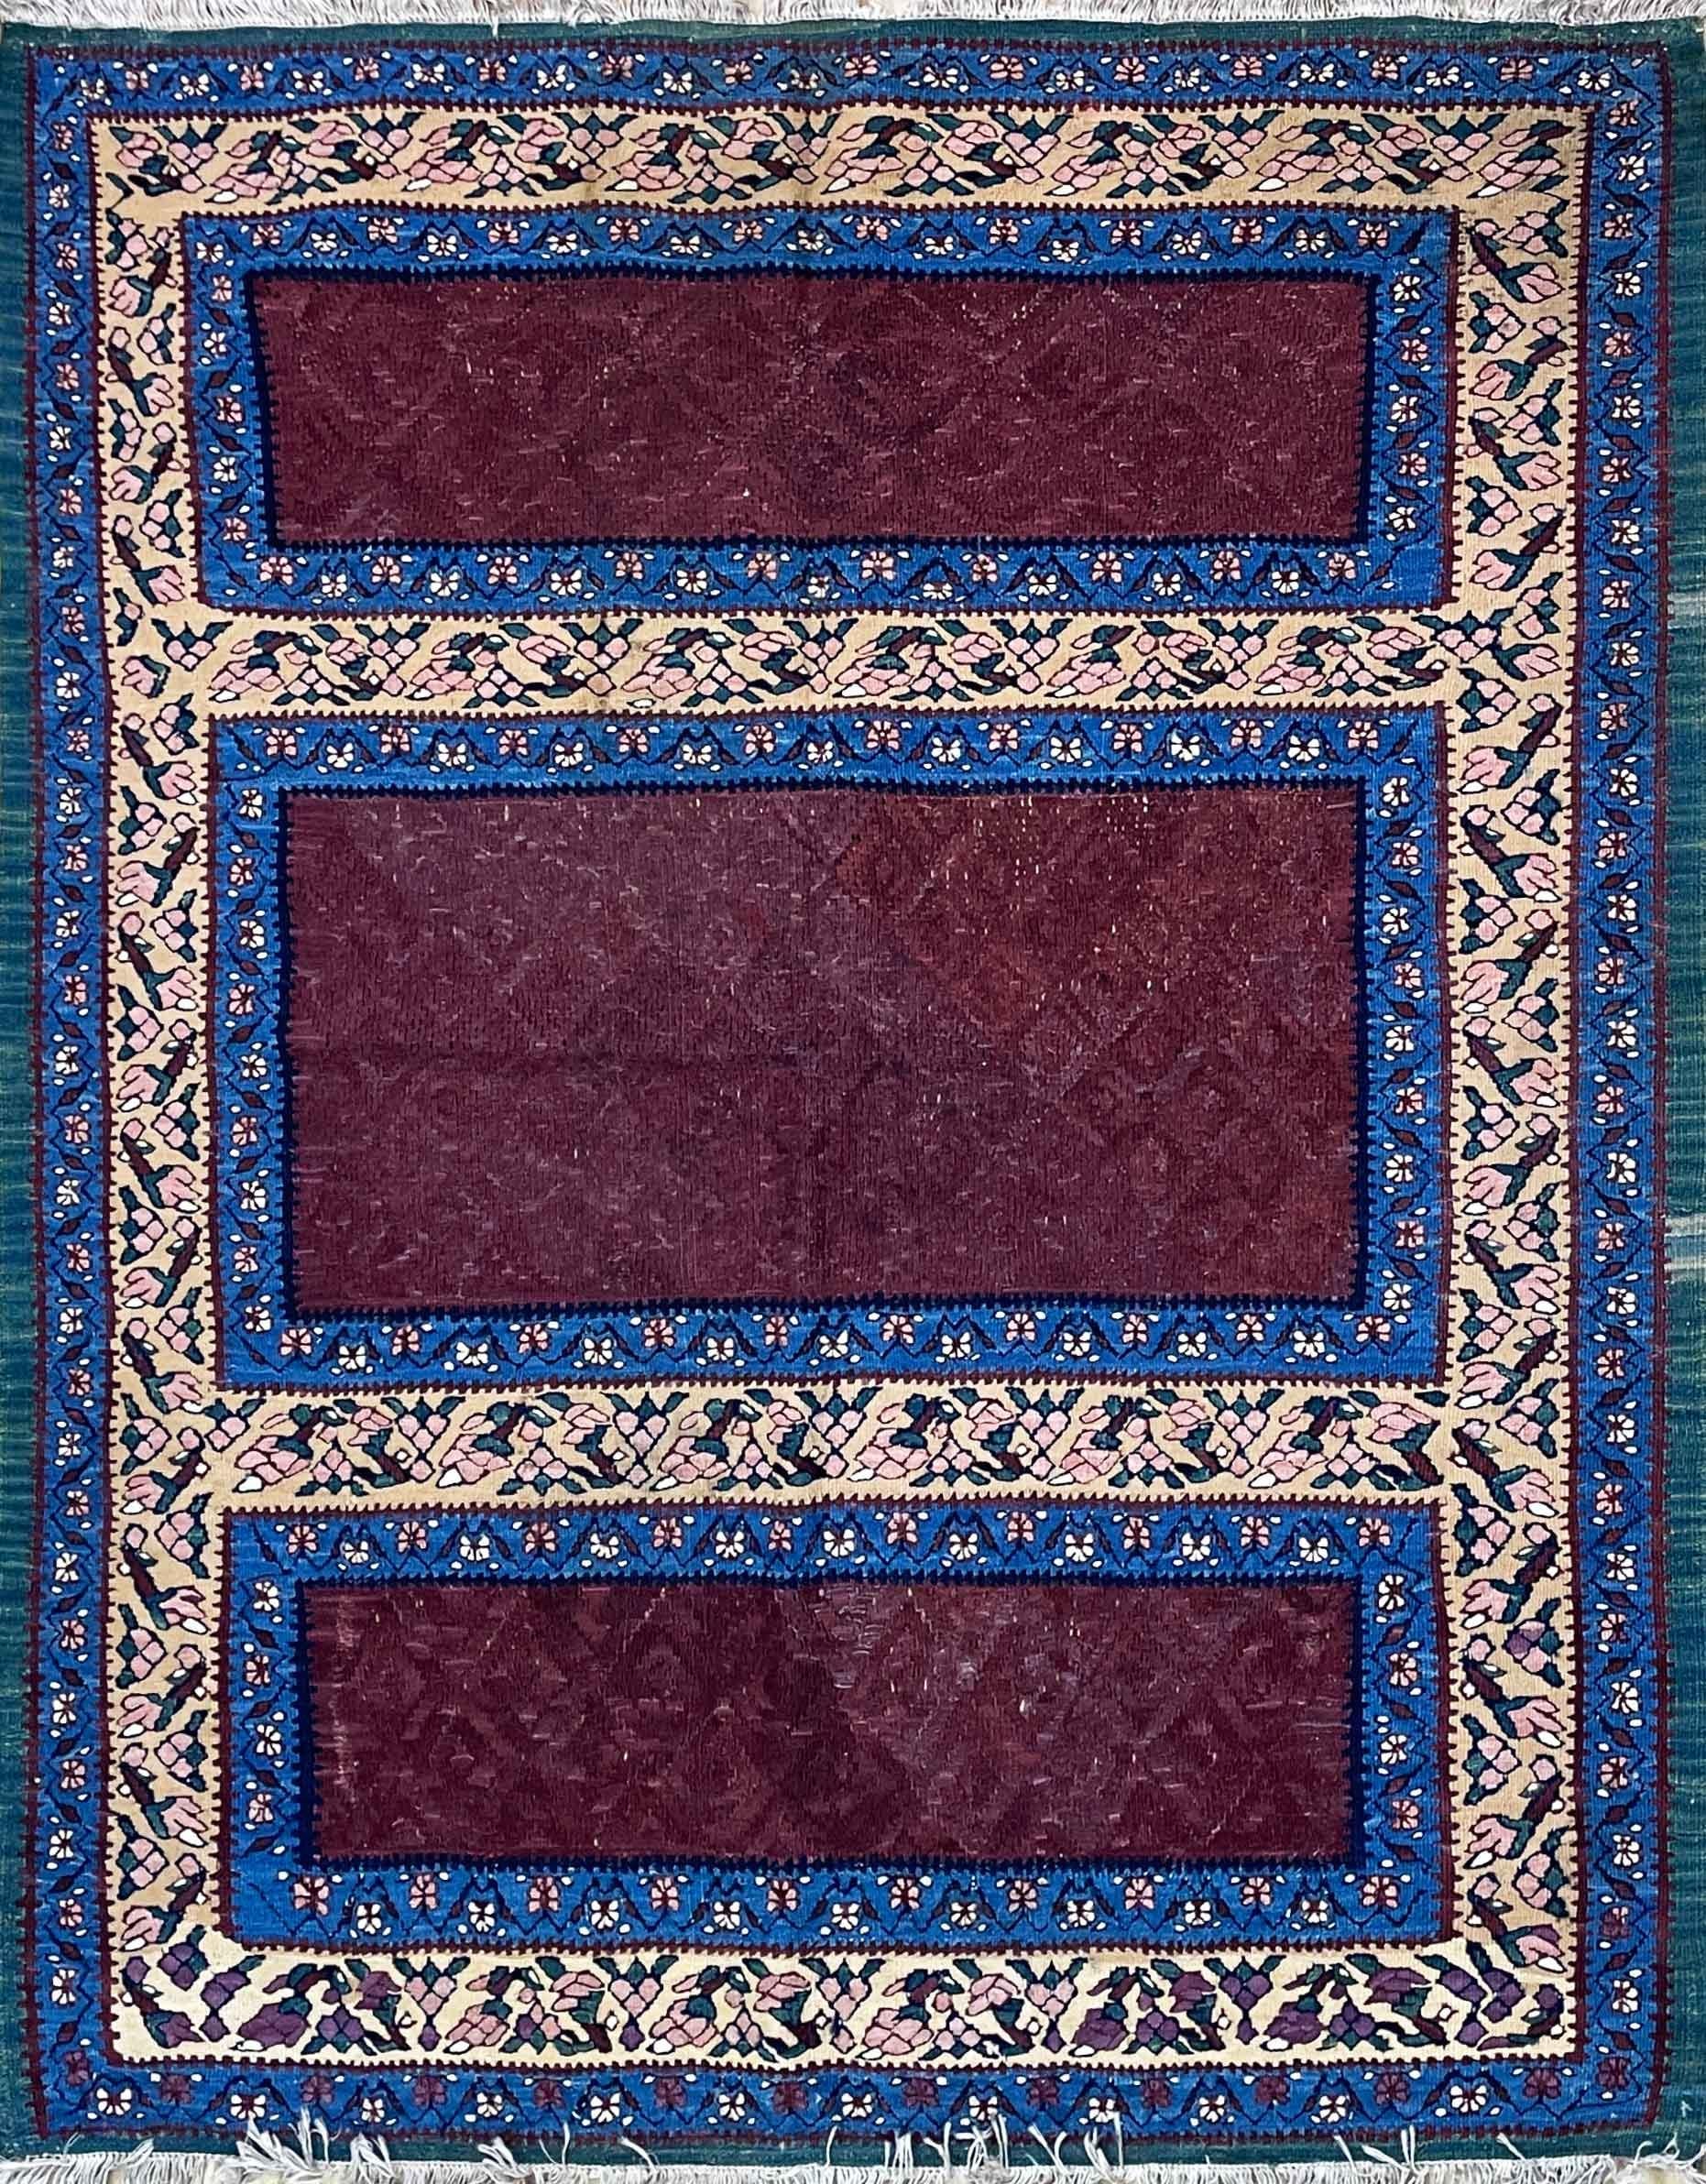 Senneh Rugs, produced in Northwest Persia, are prized for their fne, delicate design and their distinctive, weaving technique. Sennehs come in a range all-over and medallion patterns, and consequently it is their weave rather than their design that